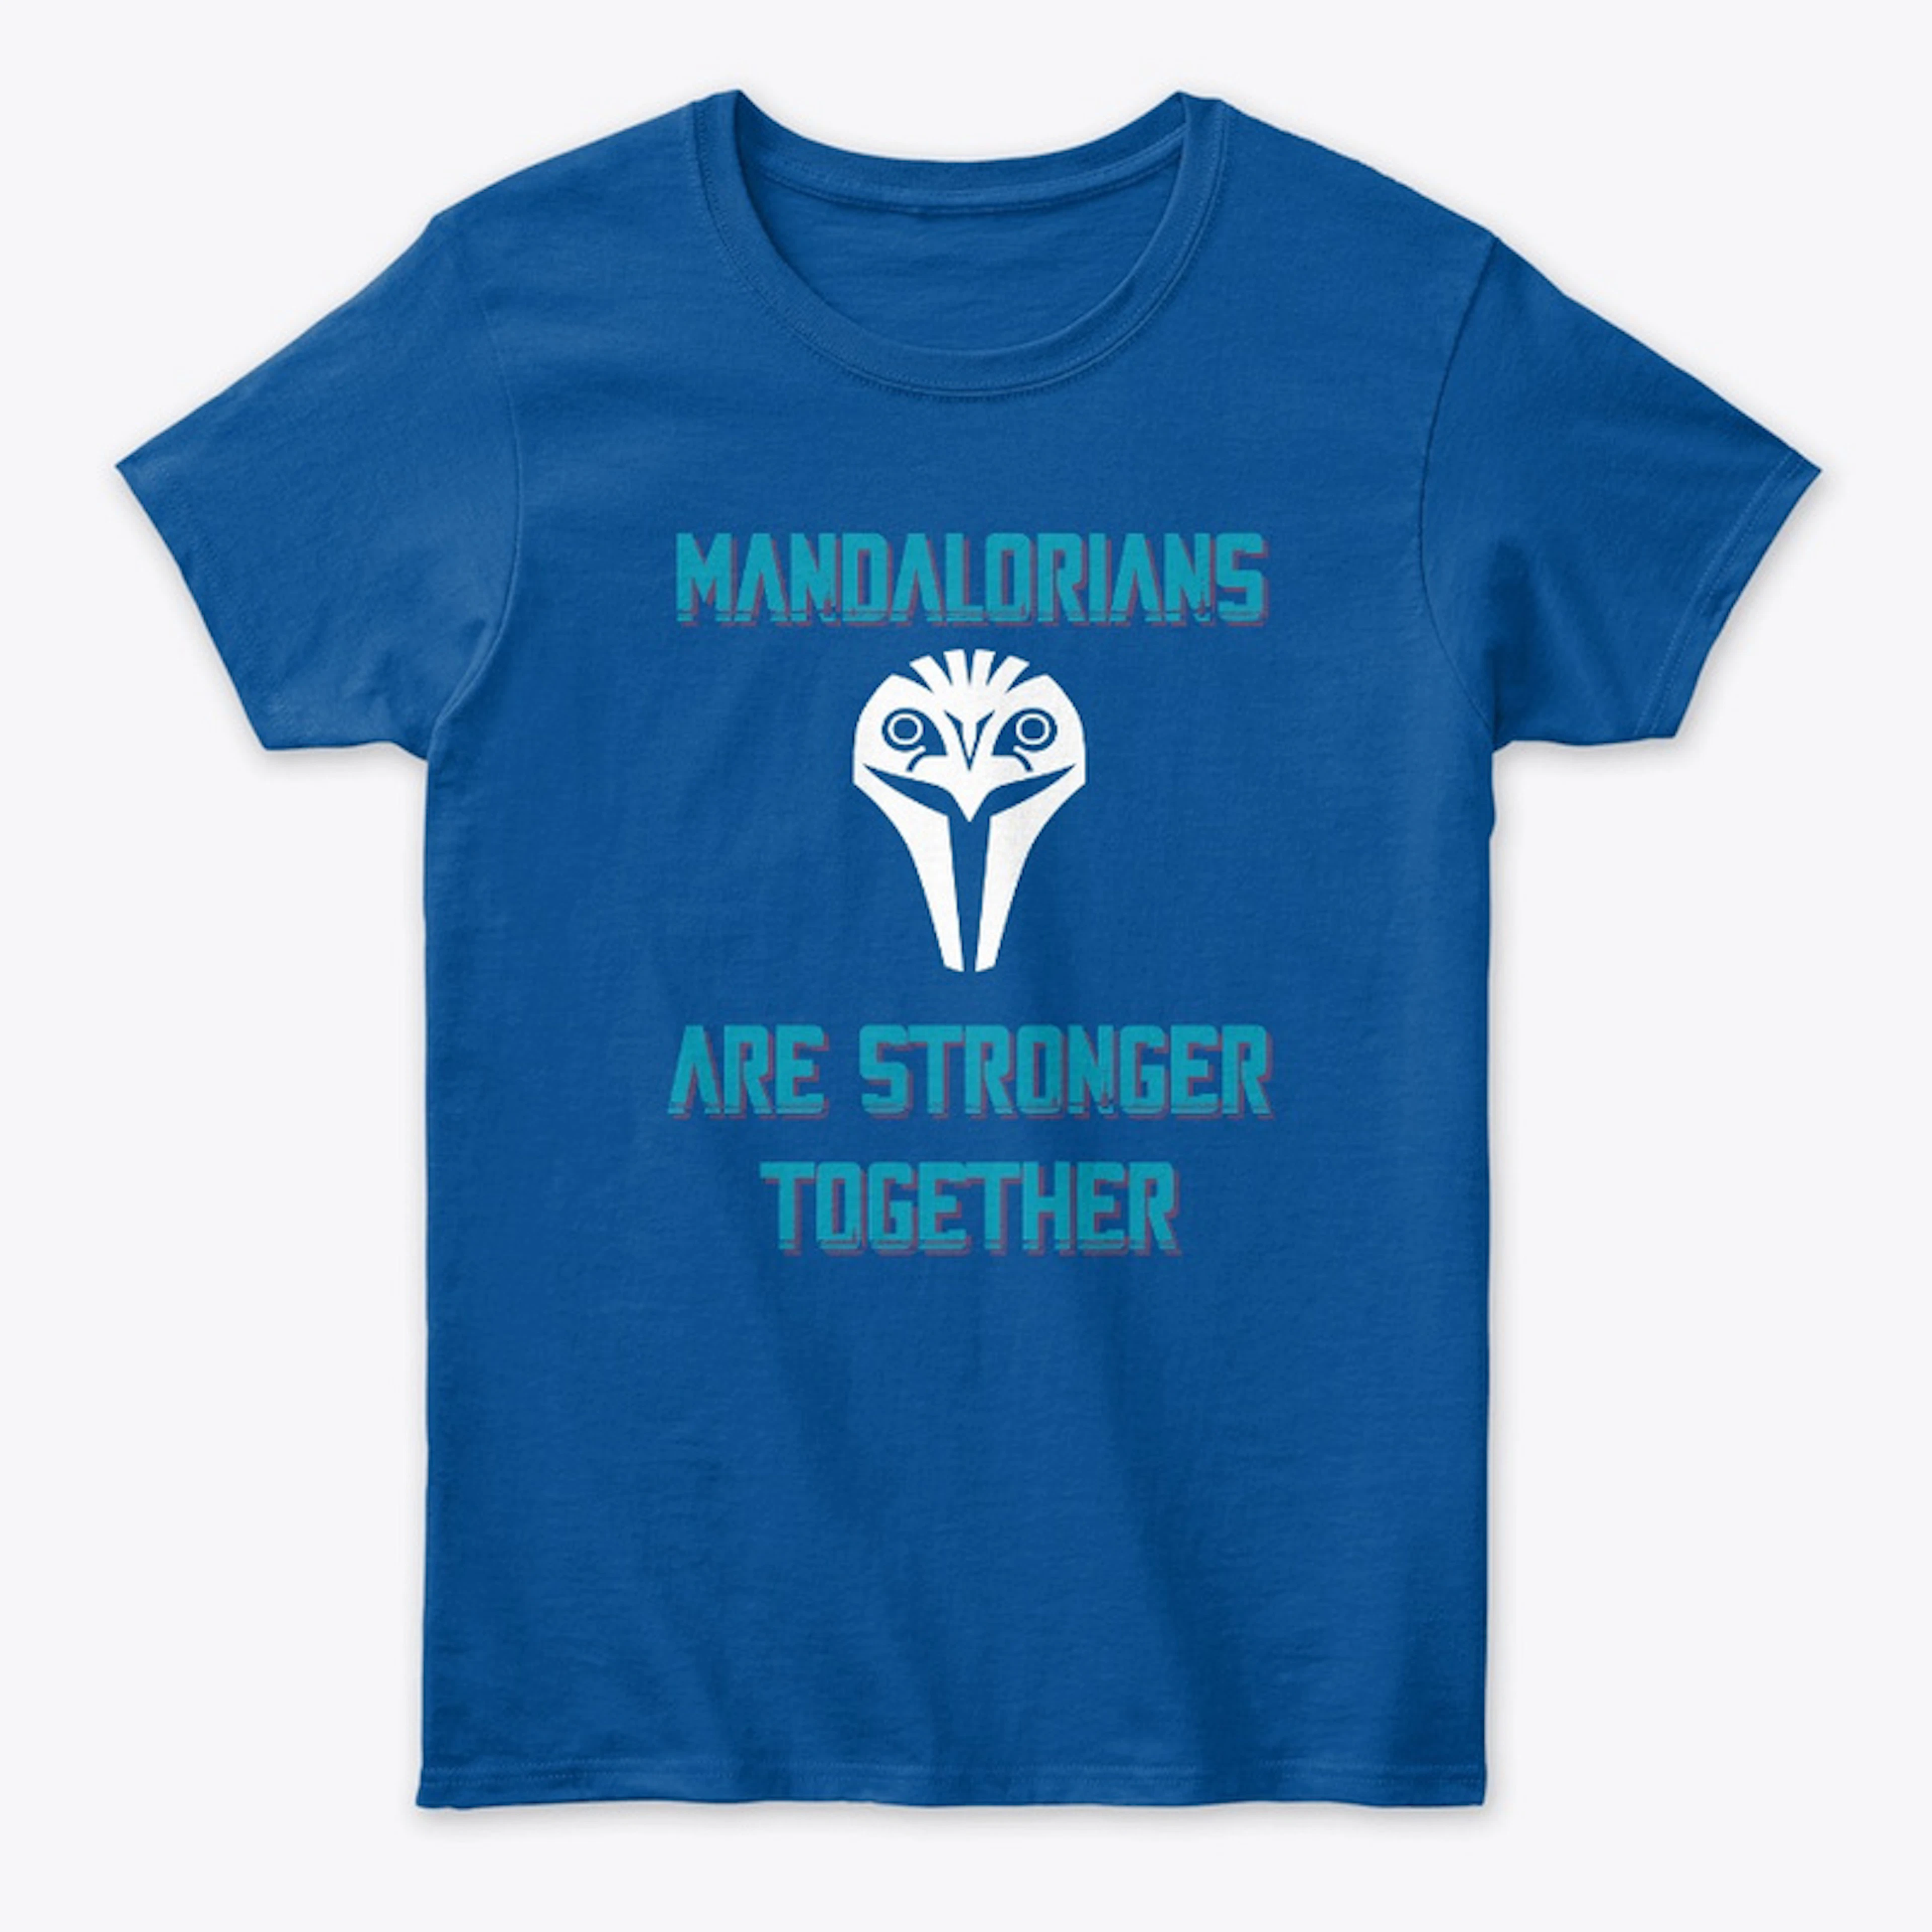 Mandalorians are stronger together